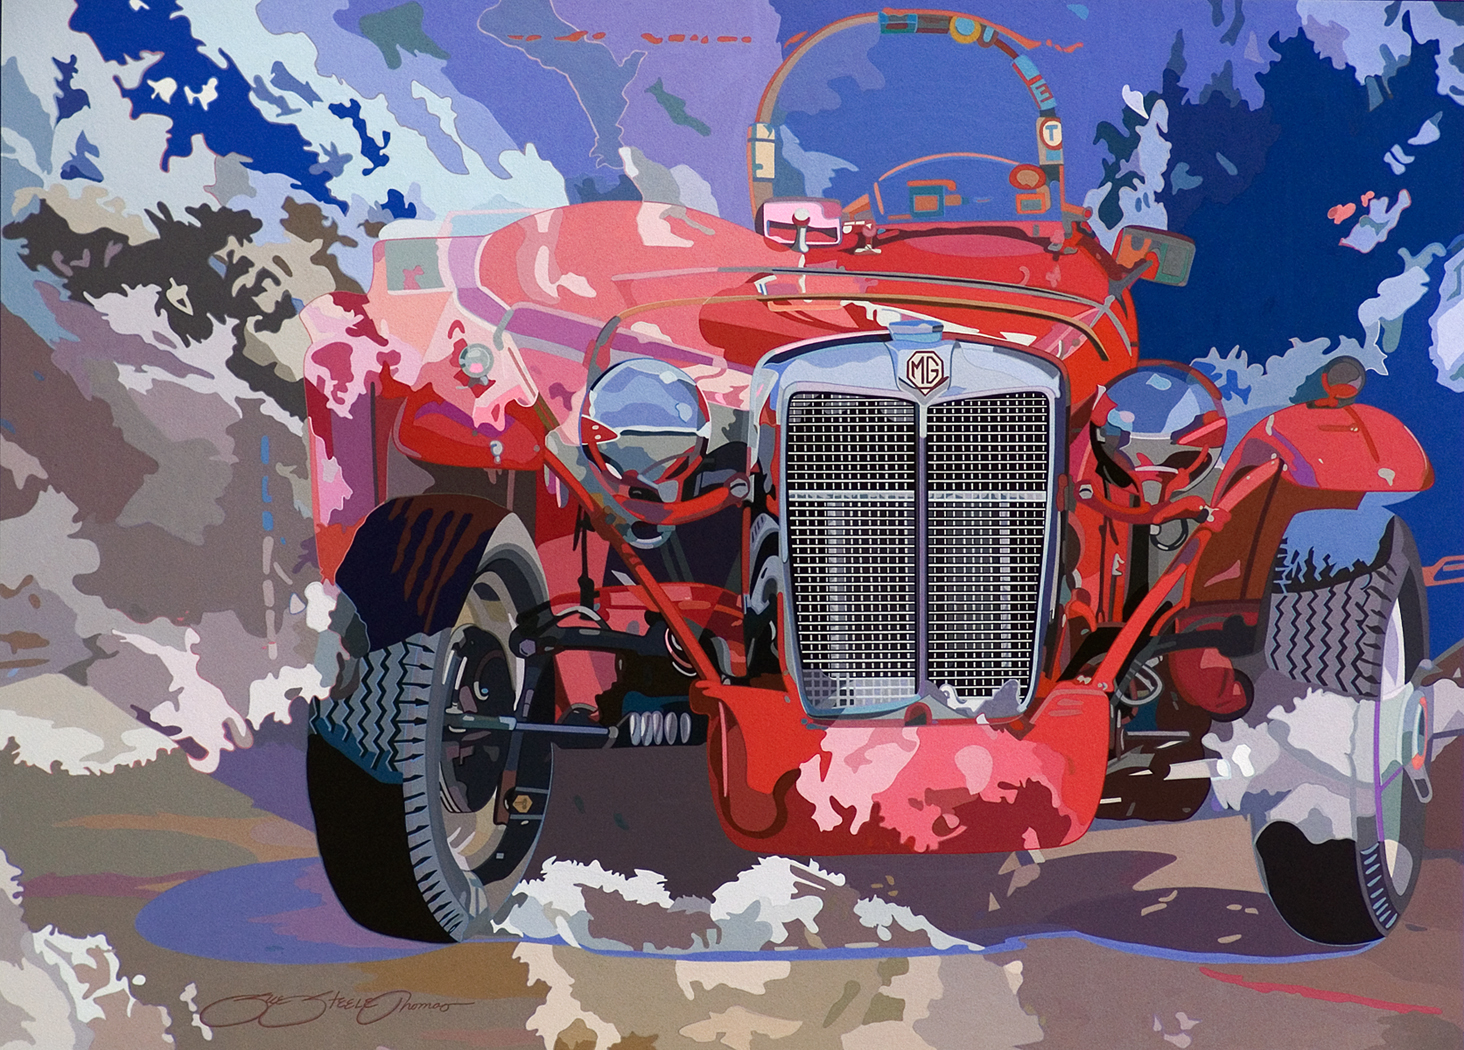 painting of an old fashioned red car in a front facing view. All around the car is a blue, grey, and light brown pattern that resembles maybe wind or water.